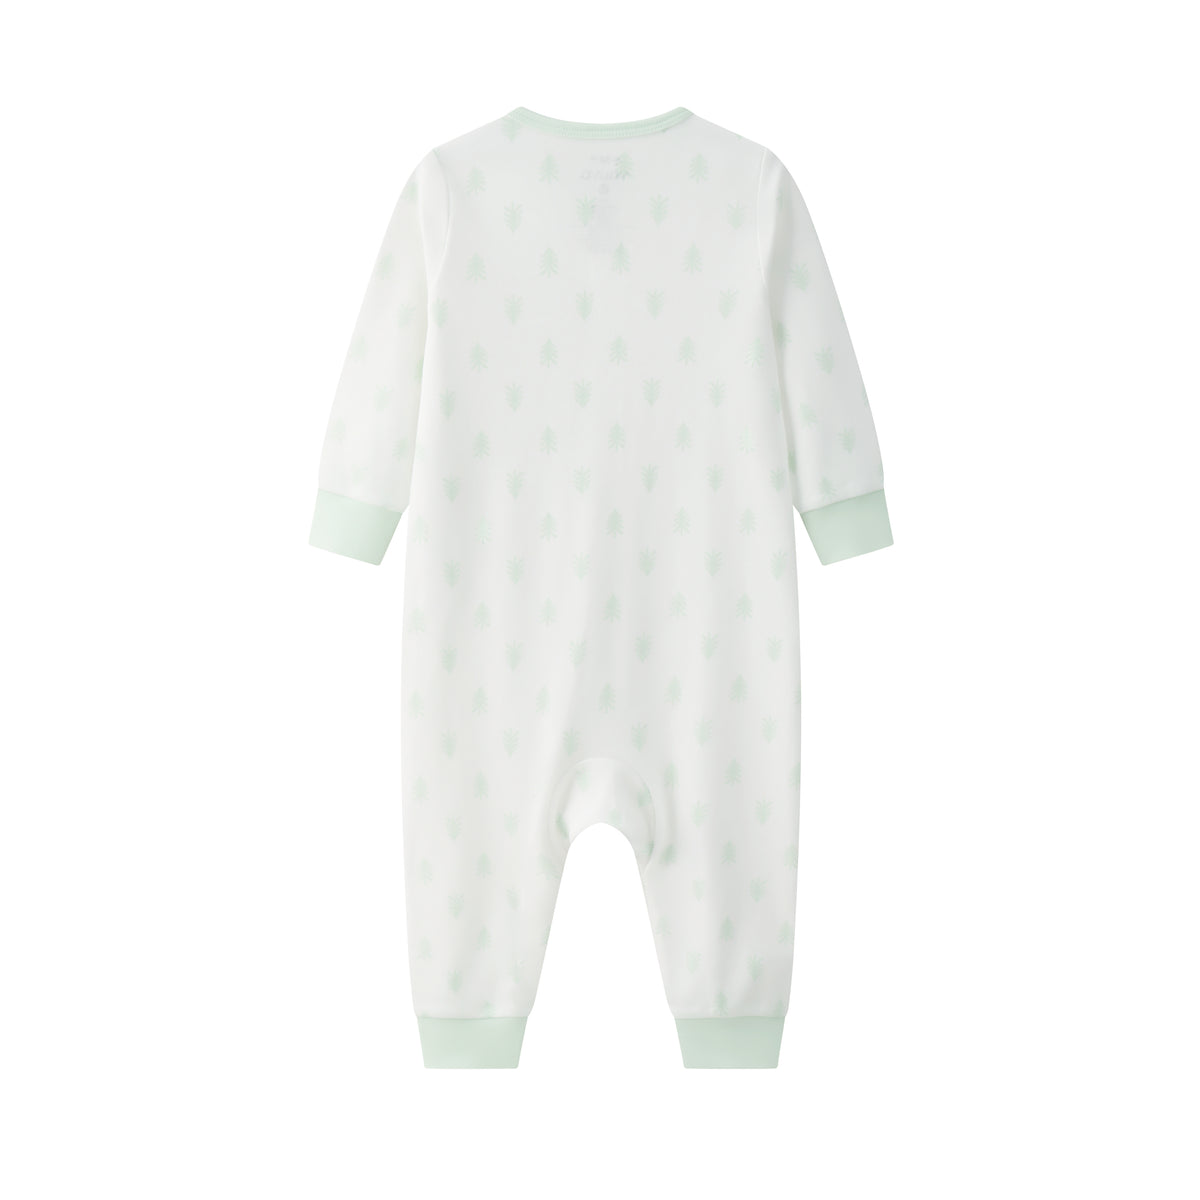 Vauva BBNS - Baby Anti-bacterial Organic Cotton Long-sleeved Romper 2-pack (Green/Strips)